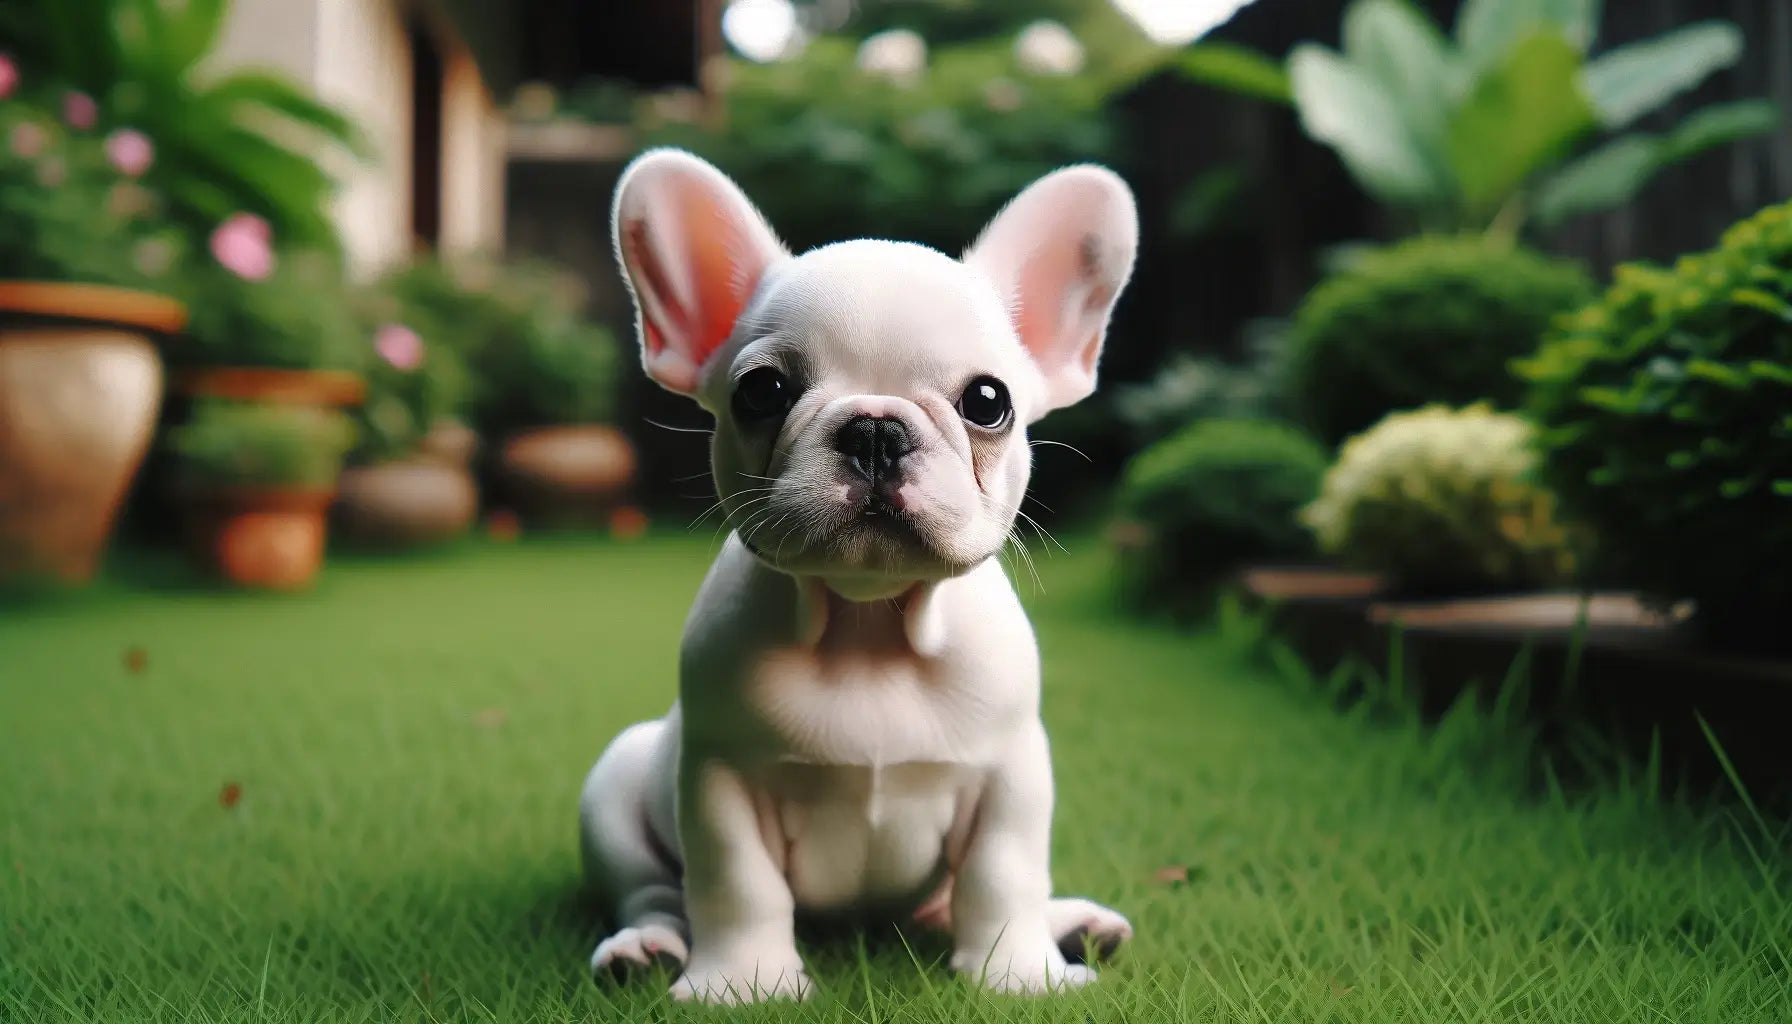 White French Bulldog seated on grass, head slightly tilted, embodying calm curiosity.